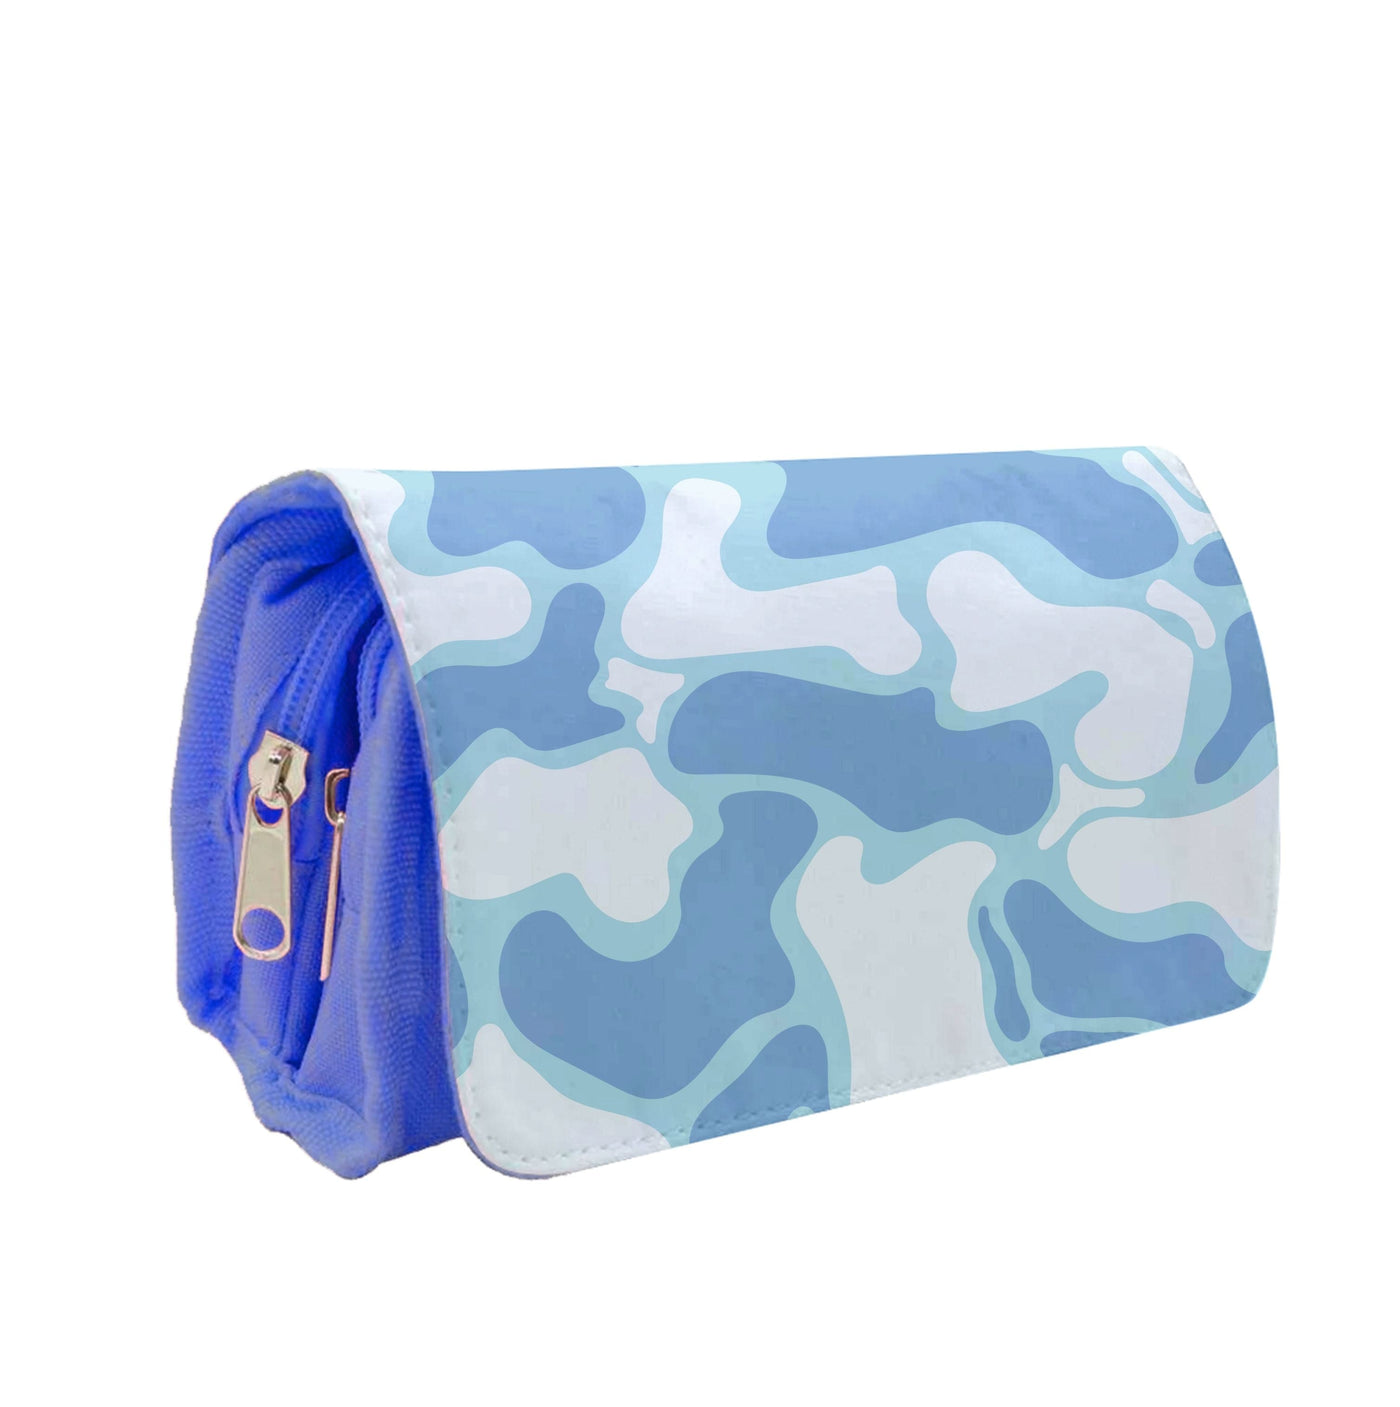 Abstract Pattern 18 Pencil Case